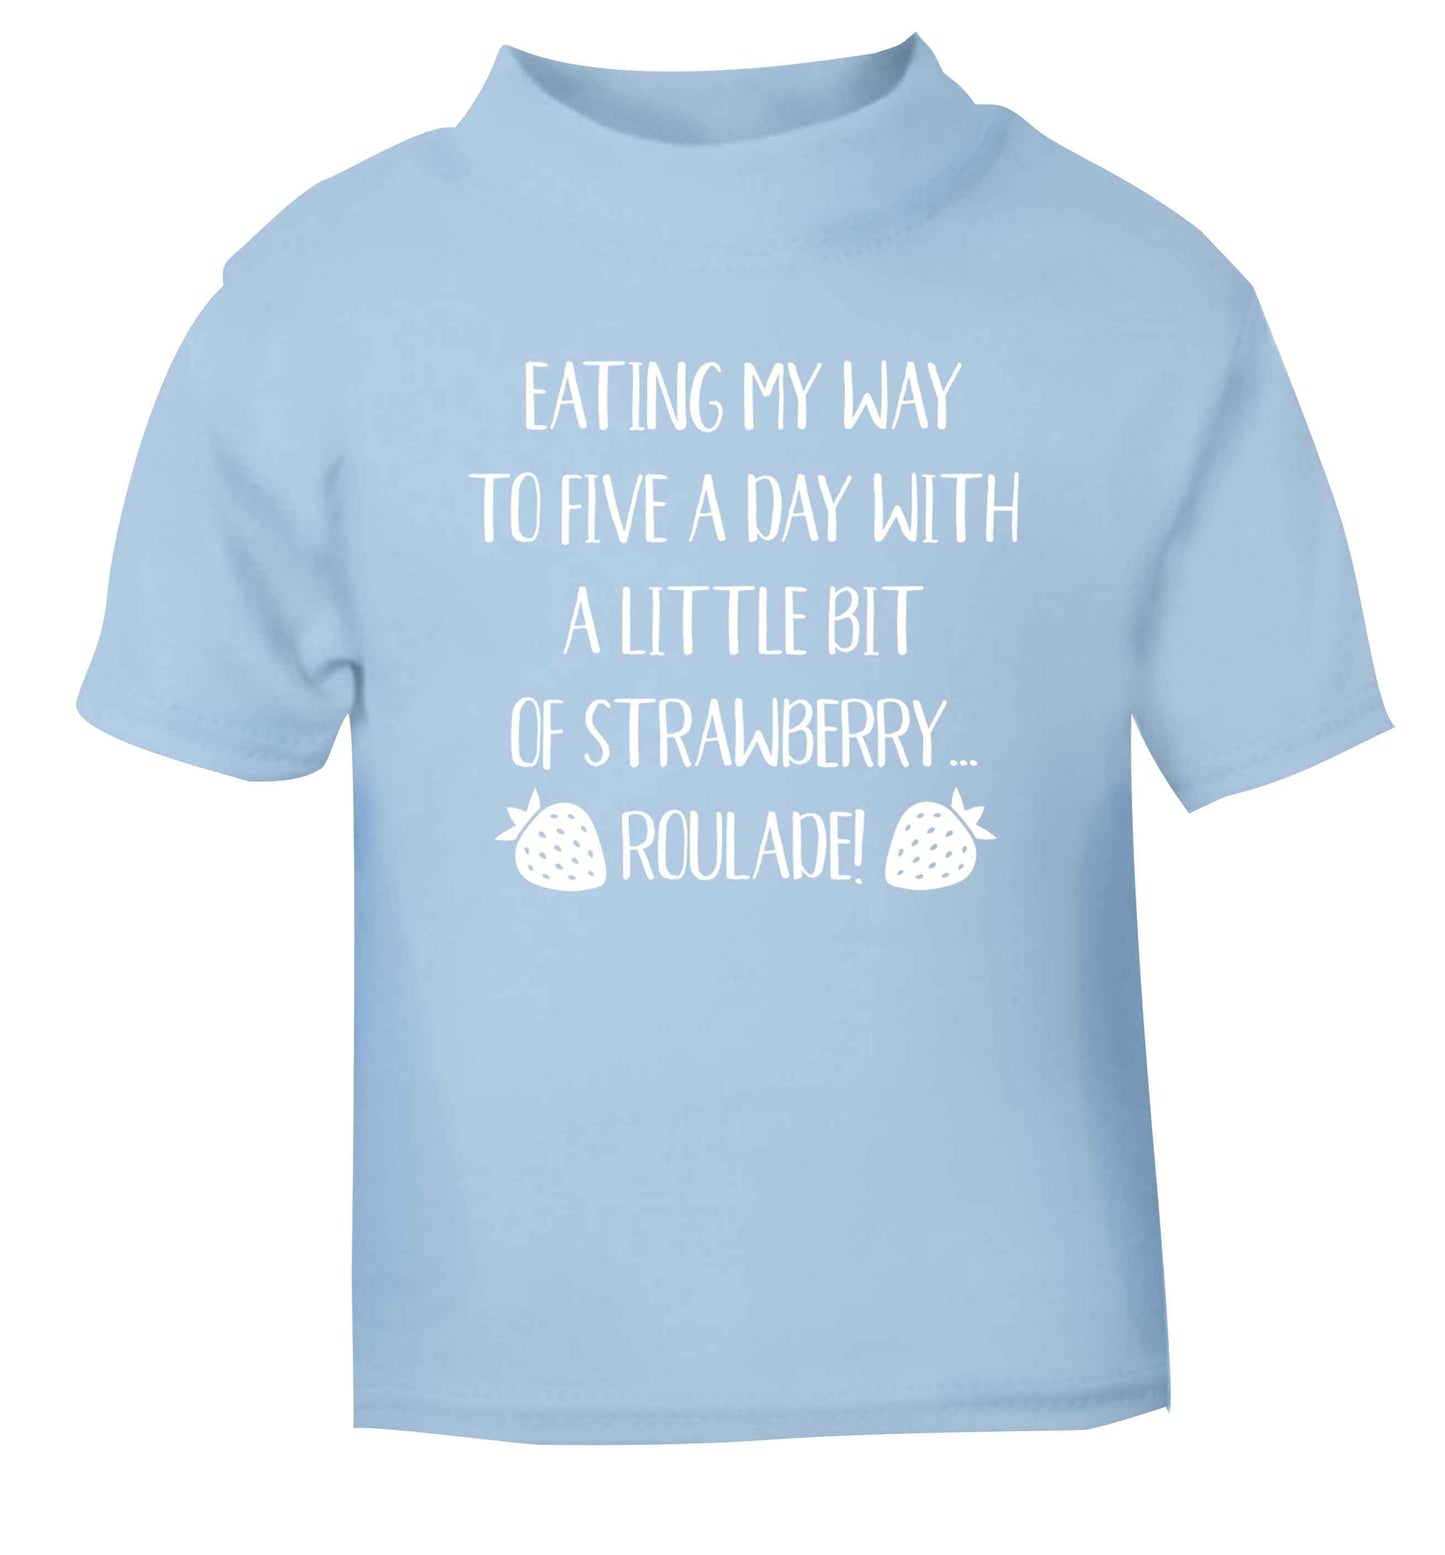 Eating my way to five a day with a little bit of strawberry roulade light blue Baby Toddler Tshirt 2 Years